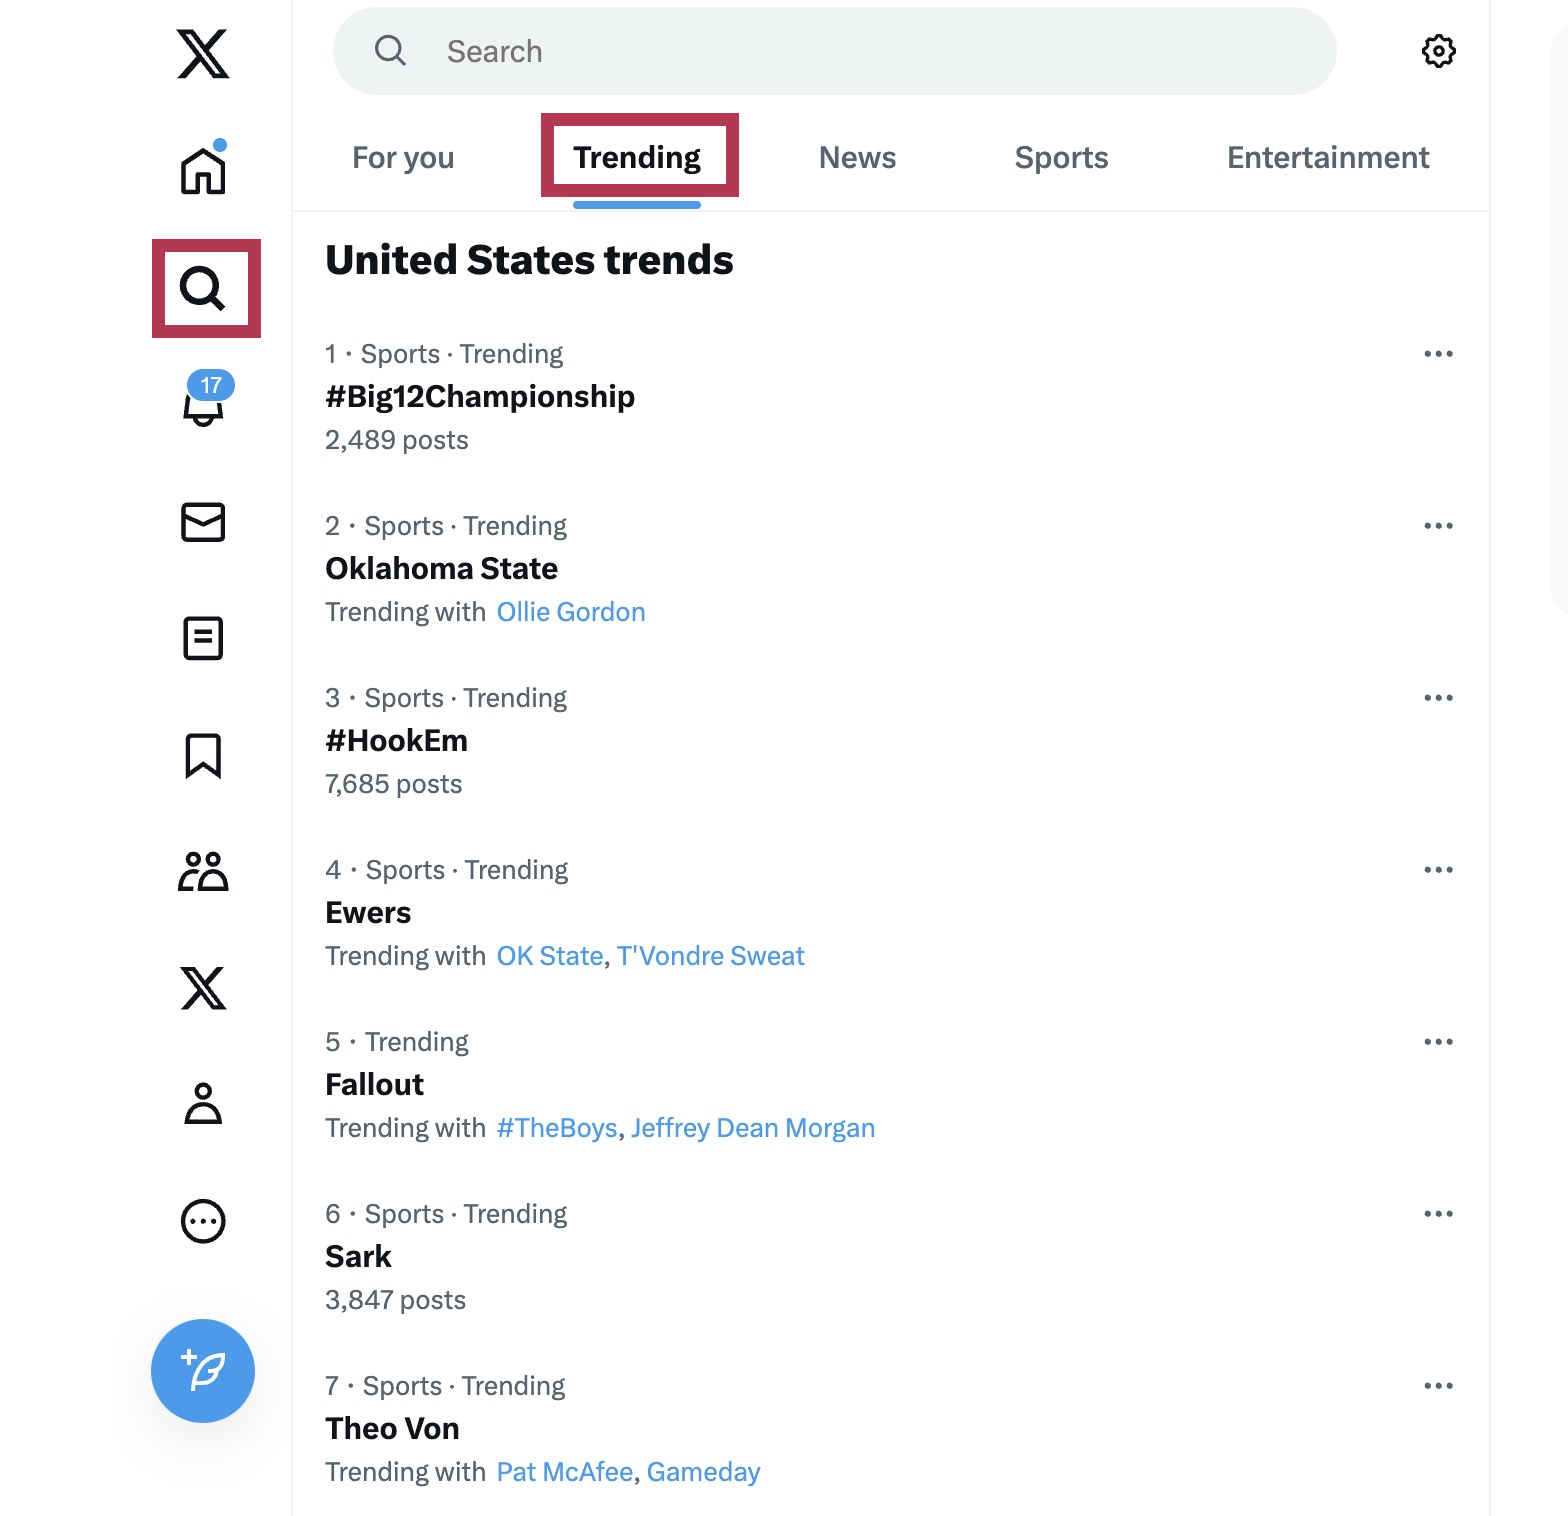 Complete Guide On How To Find Trending Topics